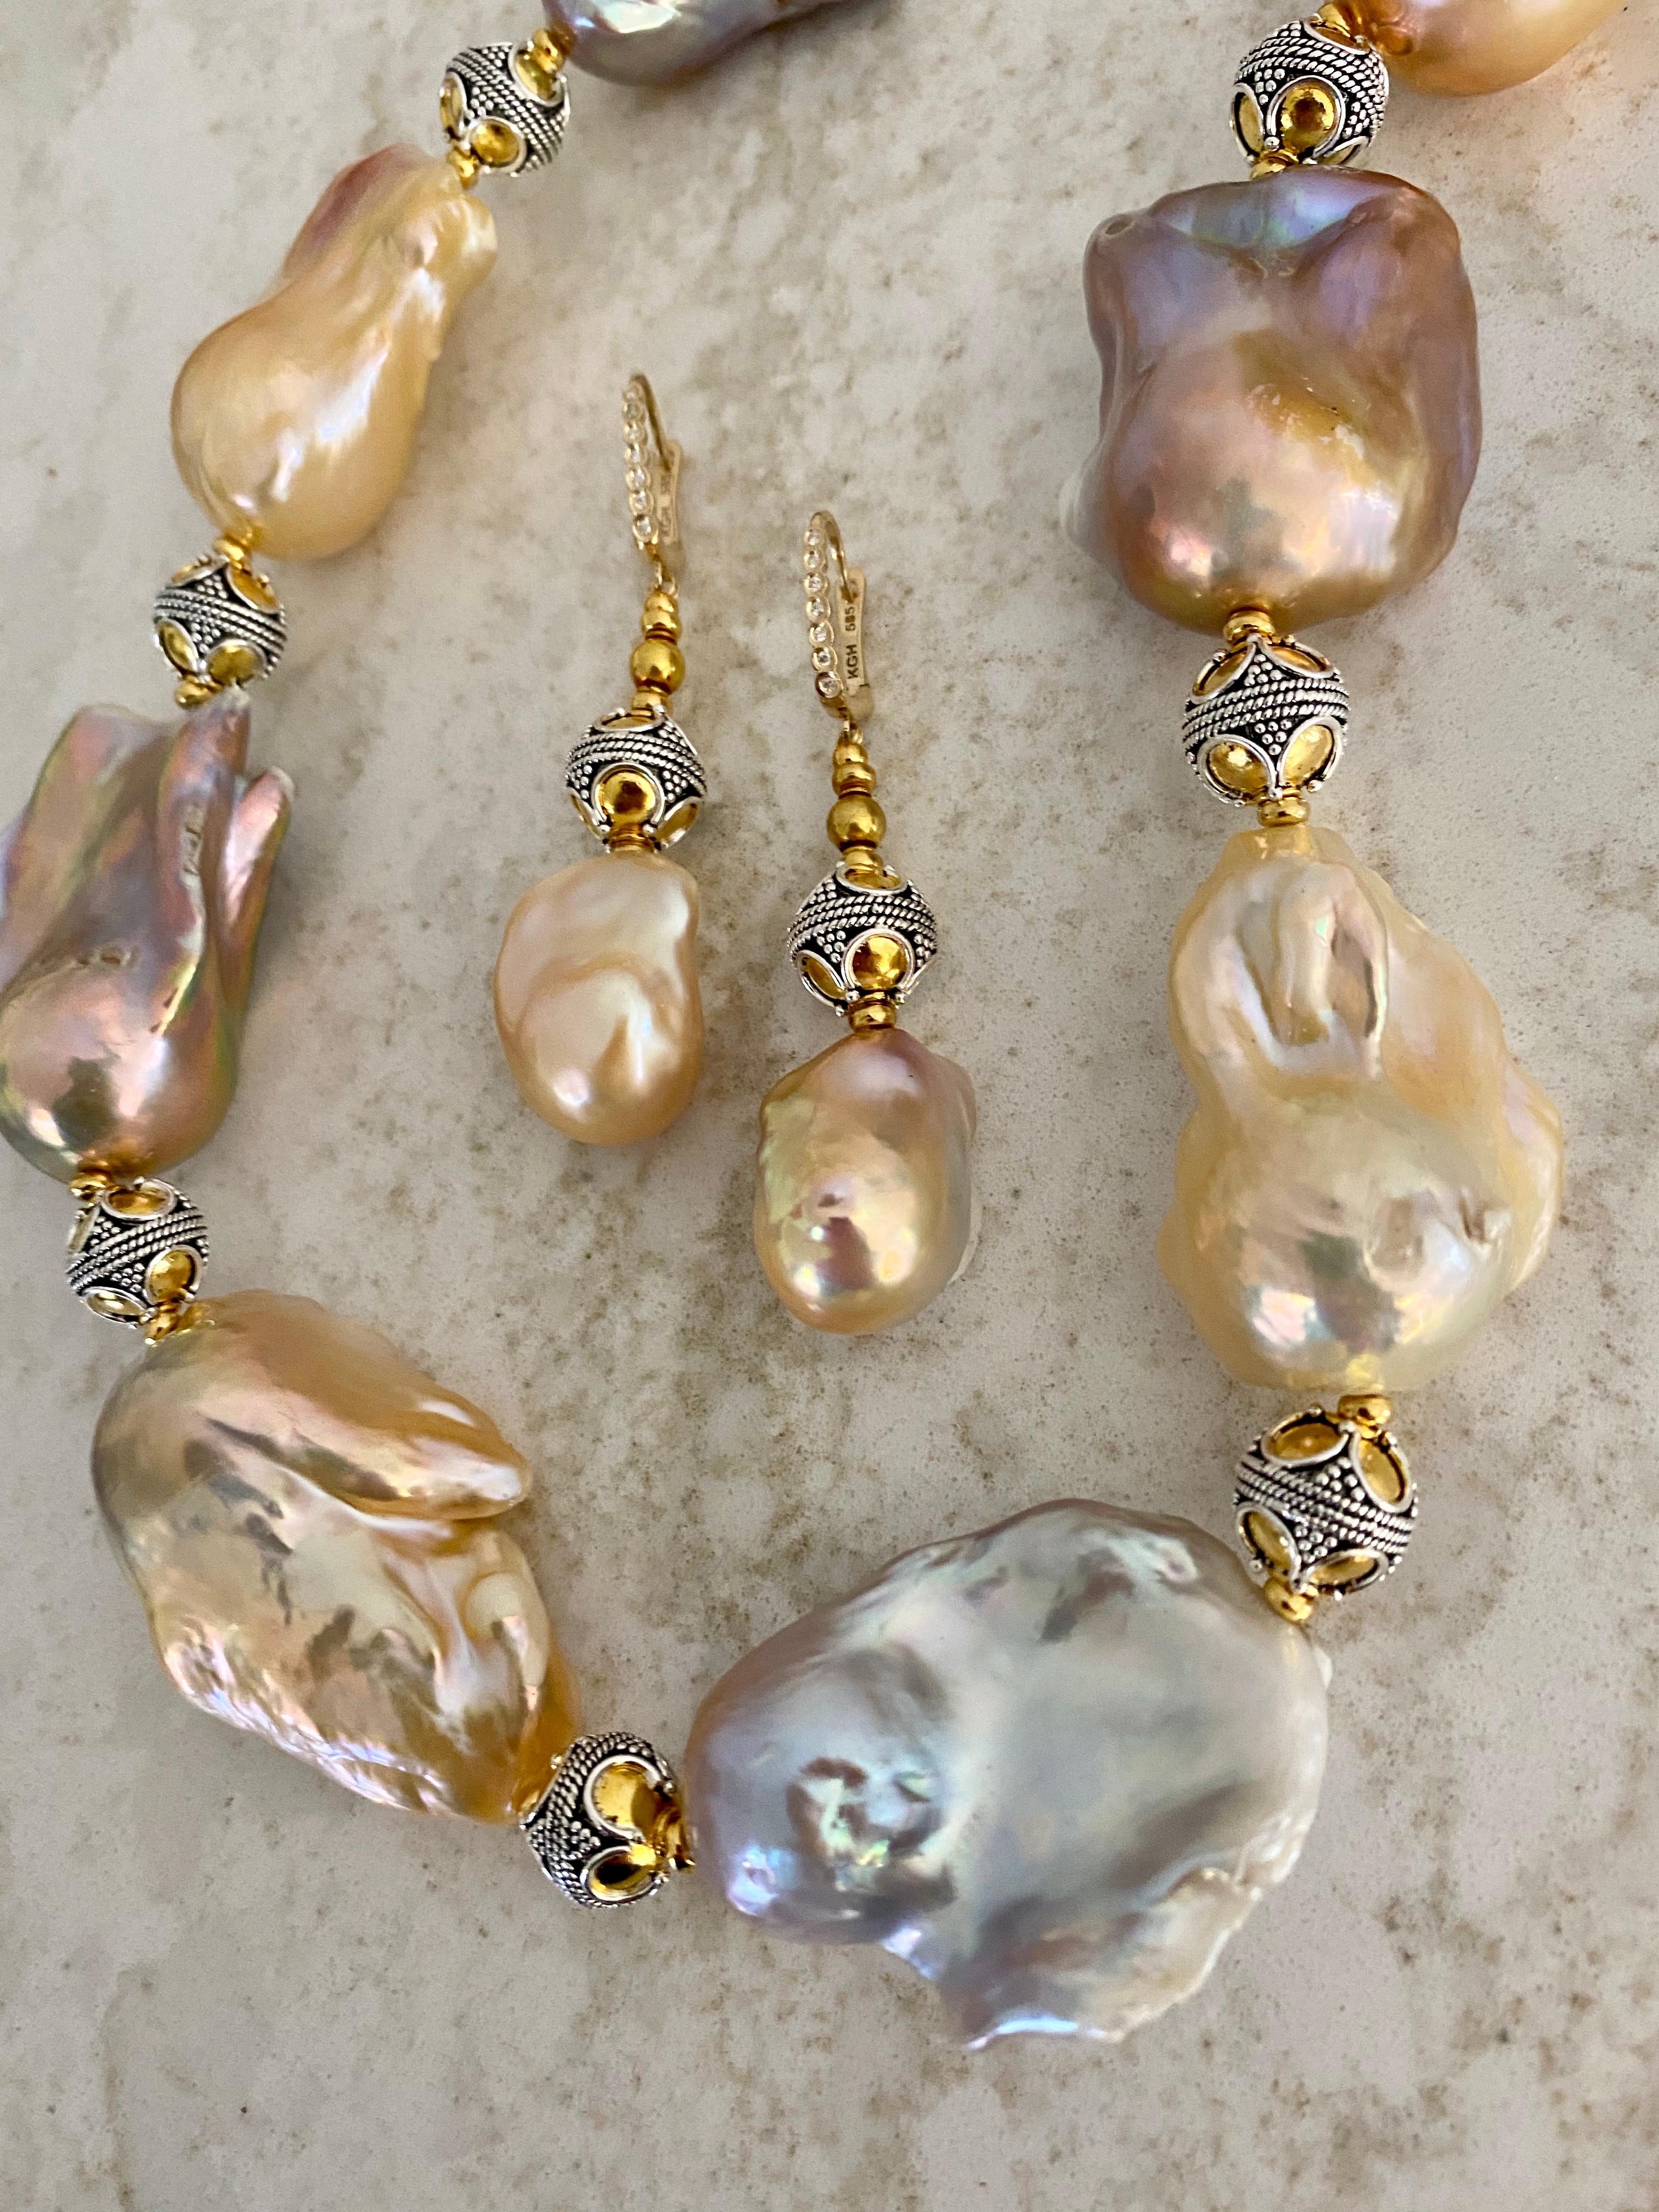 Baroque pearls (origin: China) are featured in this necklace and earring suite.  The pearls are in shades of pink, lavender, peach and gray.  They are blemish free and possess splendid luster.  The necklace measures 23 1/2 inches.  The earrings are